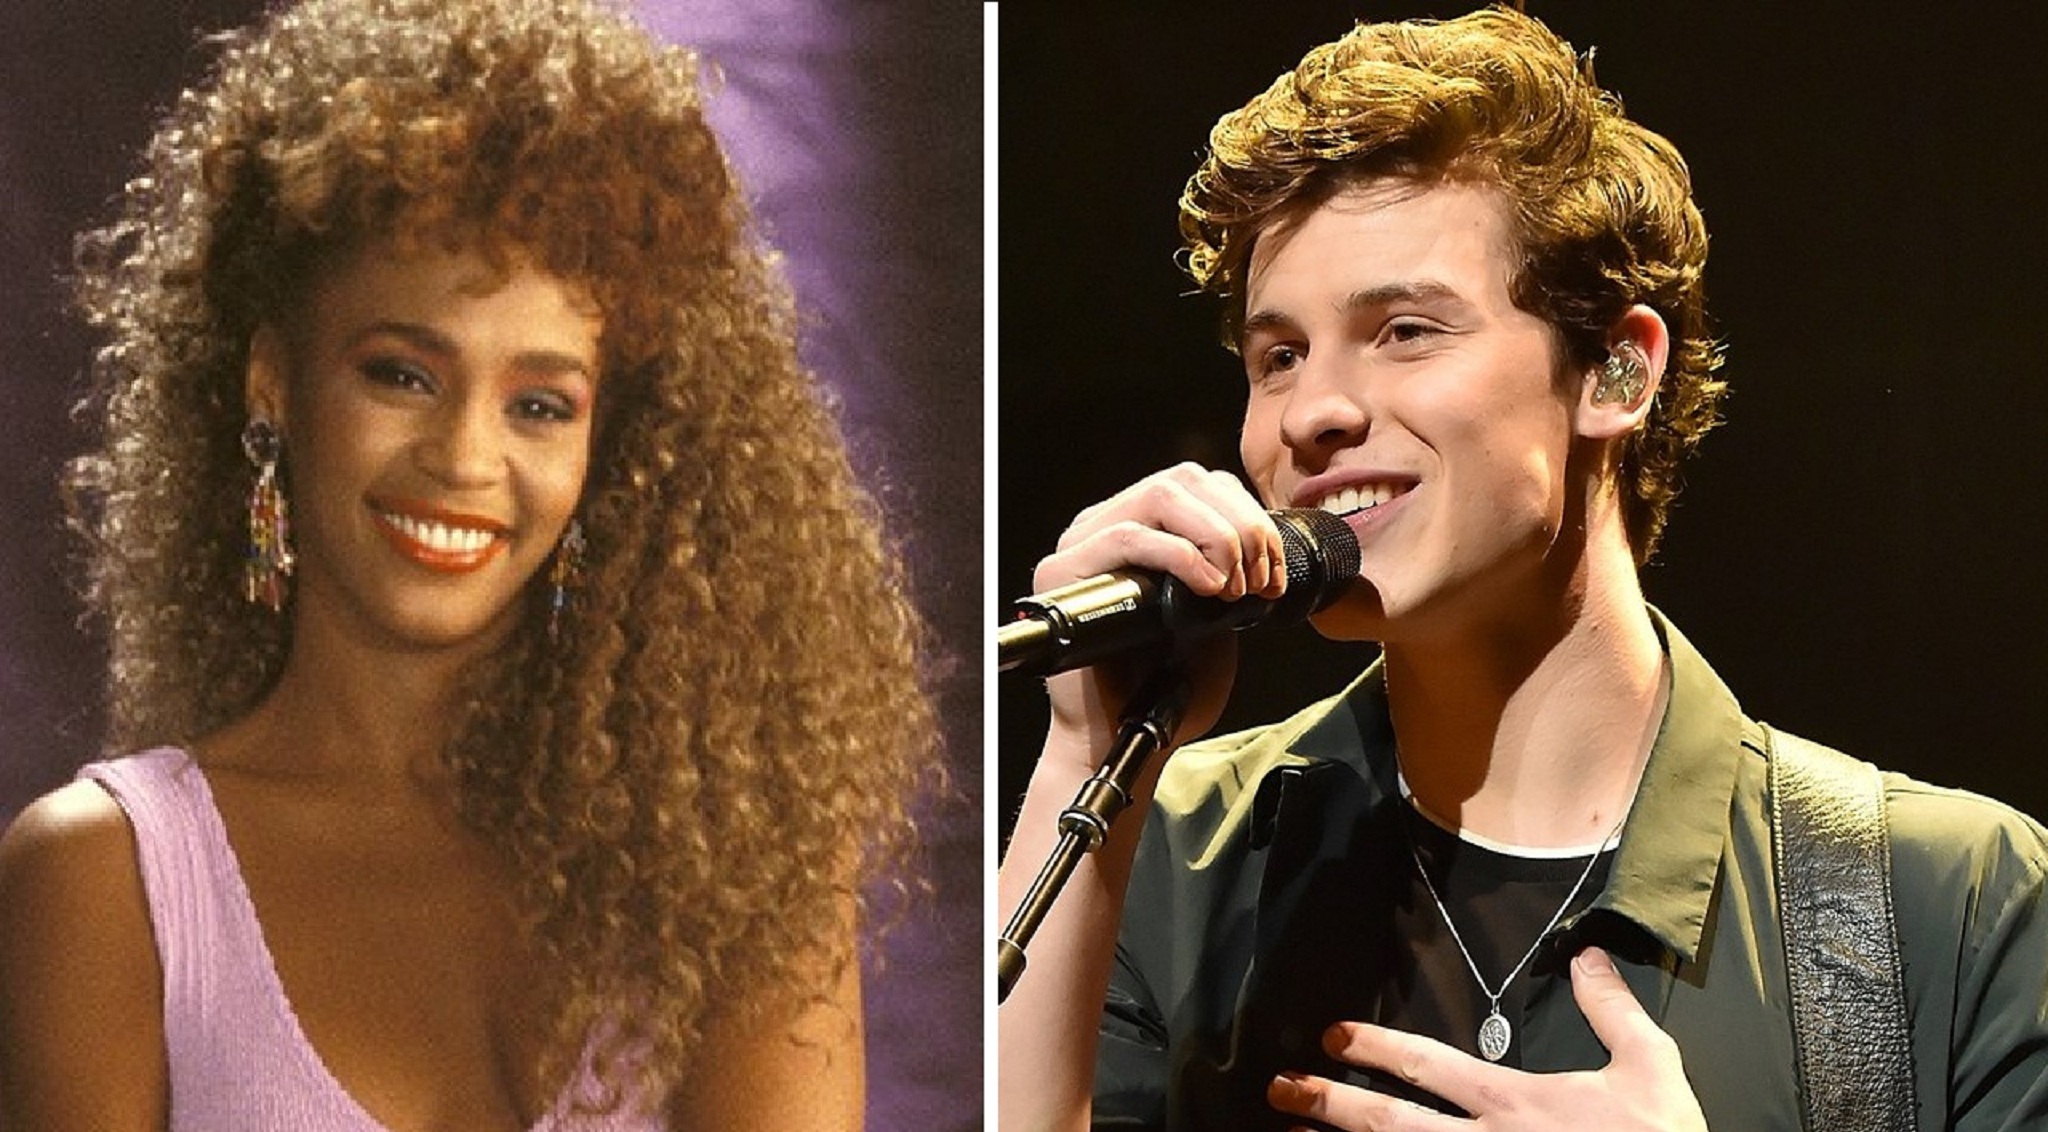 Watch: Shawn Mendes Covers Whitney Houston’s ‘I Wanna Dance With Somebody’